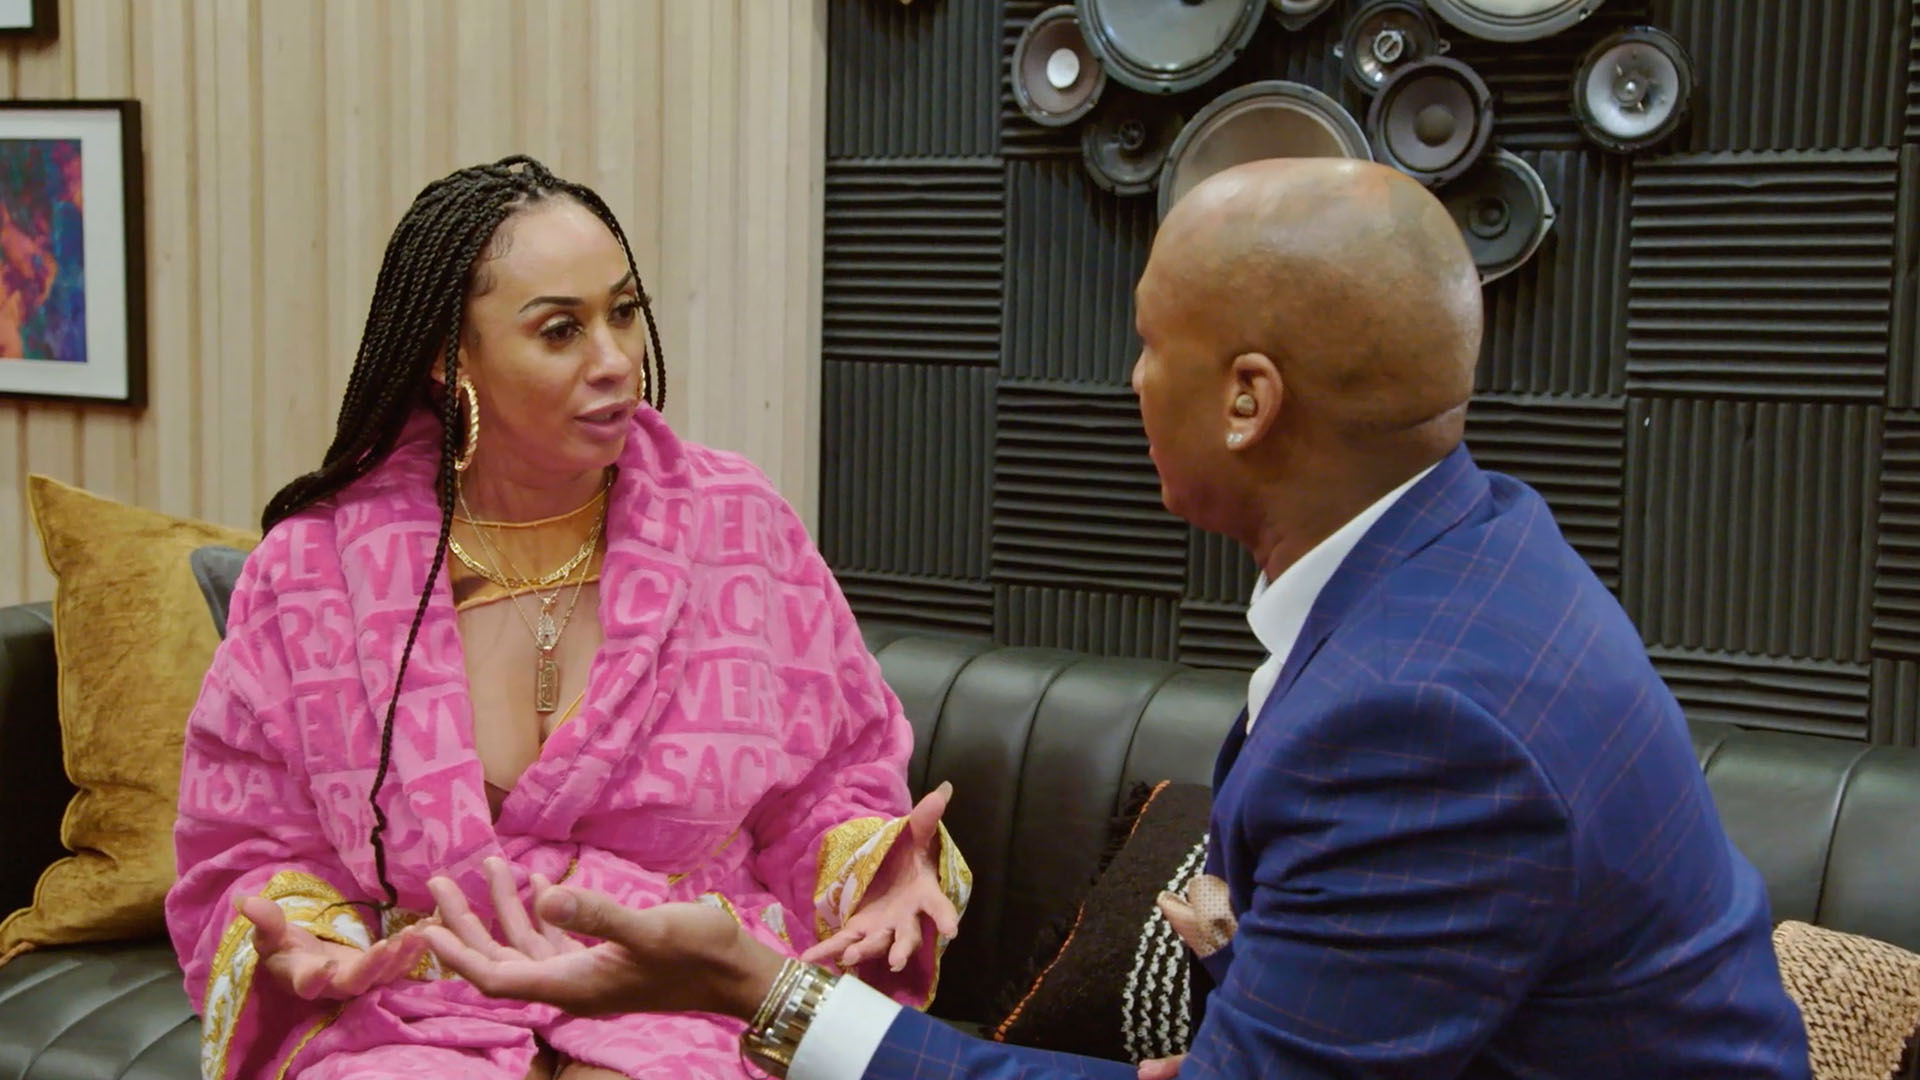 Watch Good Ish: "You're A Grown A** Woman!" | Marriage Boot Camp: Hip Hop Edition Video Extras